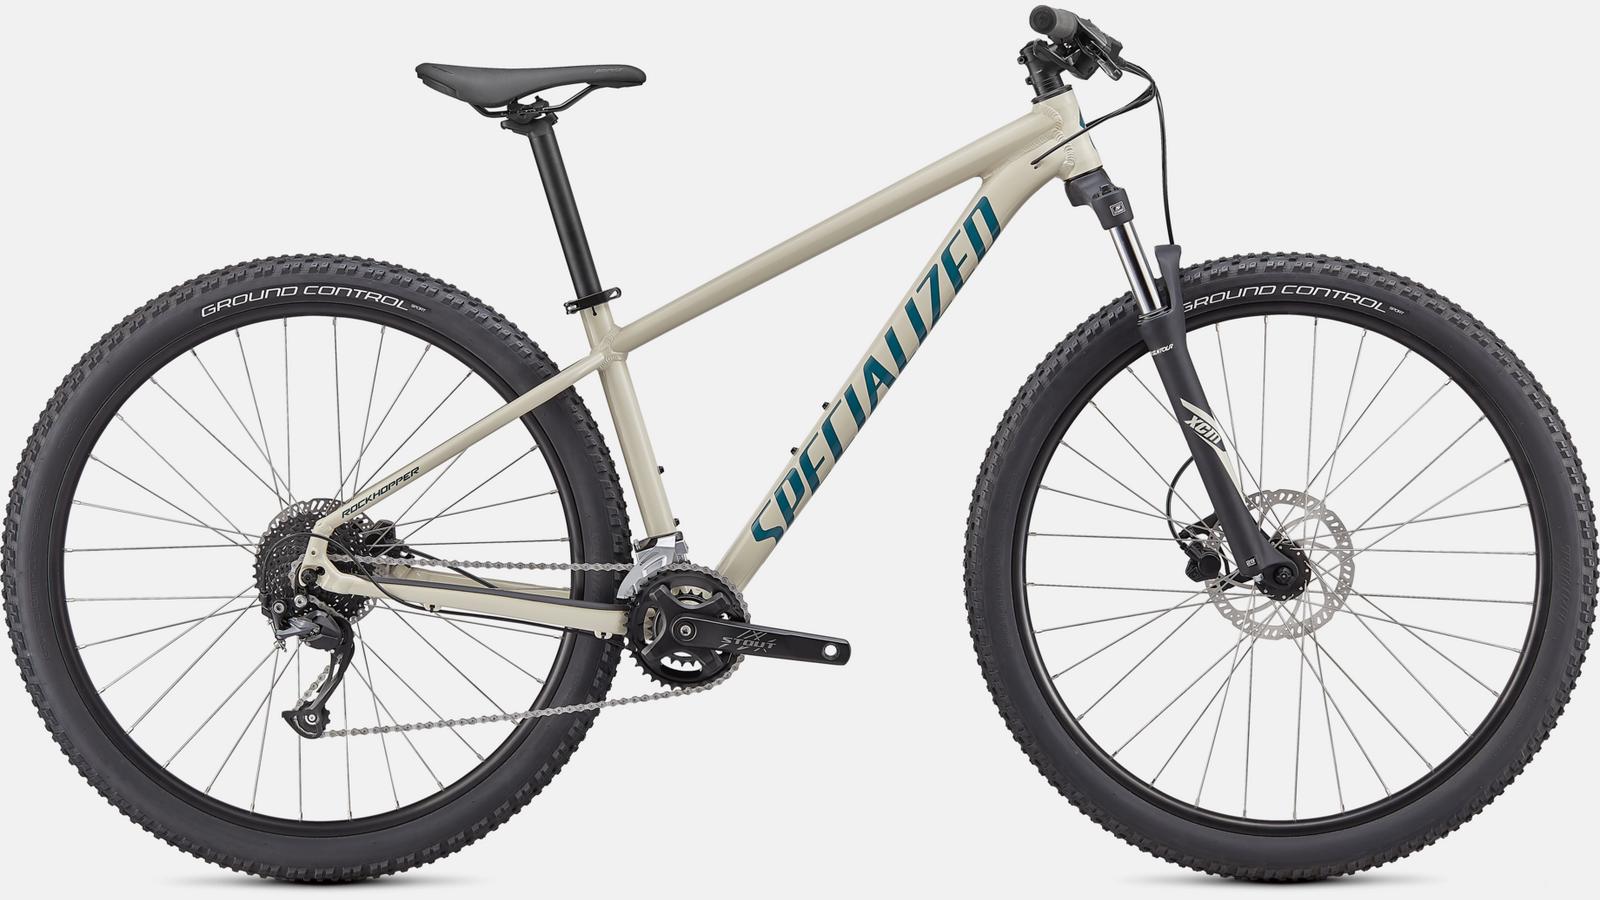 Paint for 2021 Specialized Rockhopper Sport - Gloss White Mountains